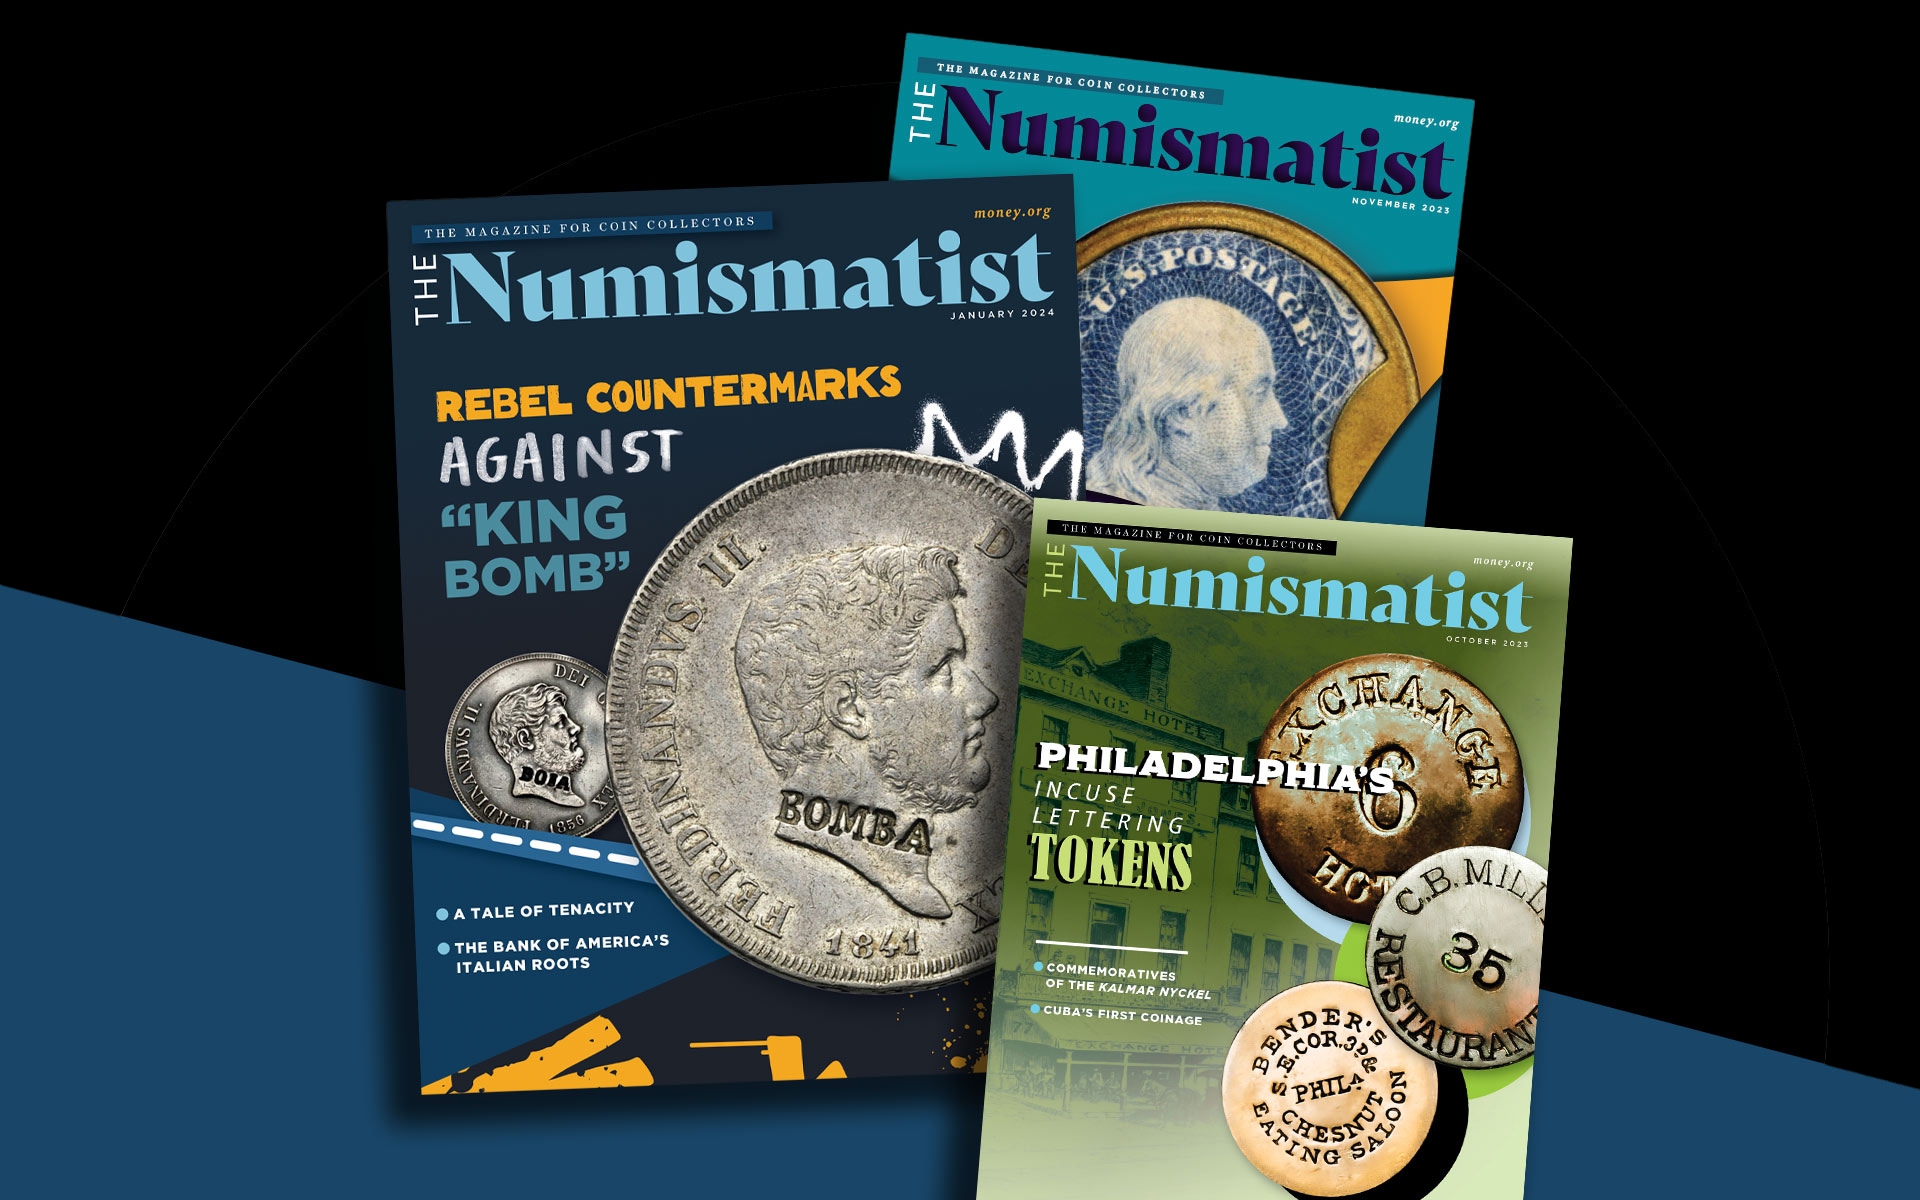 What is a coin collector?, Numismatist